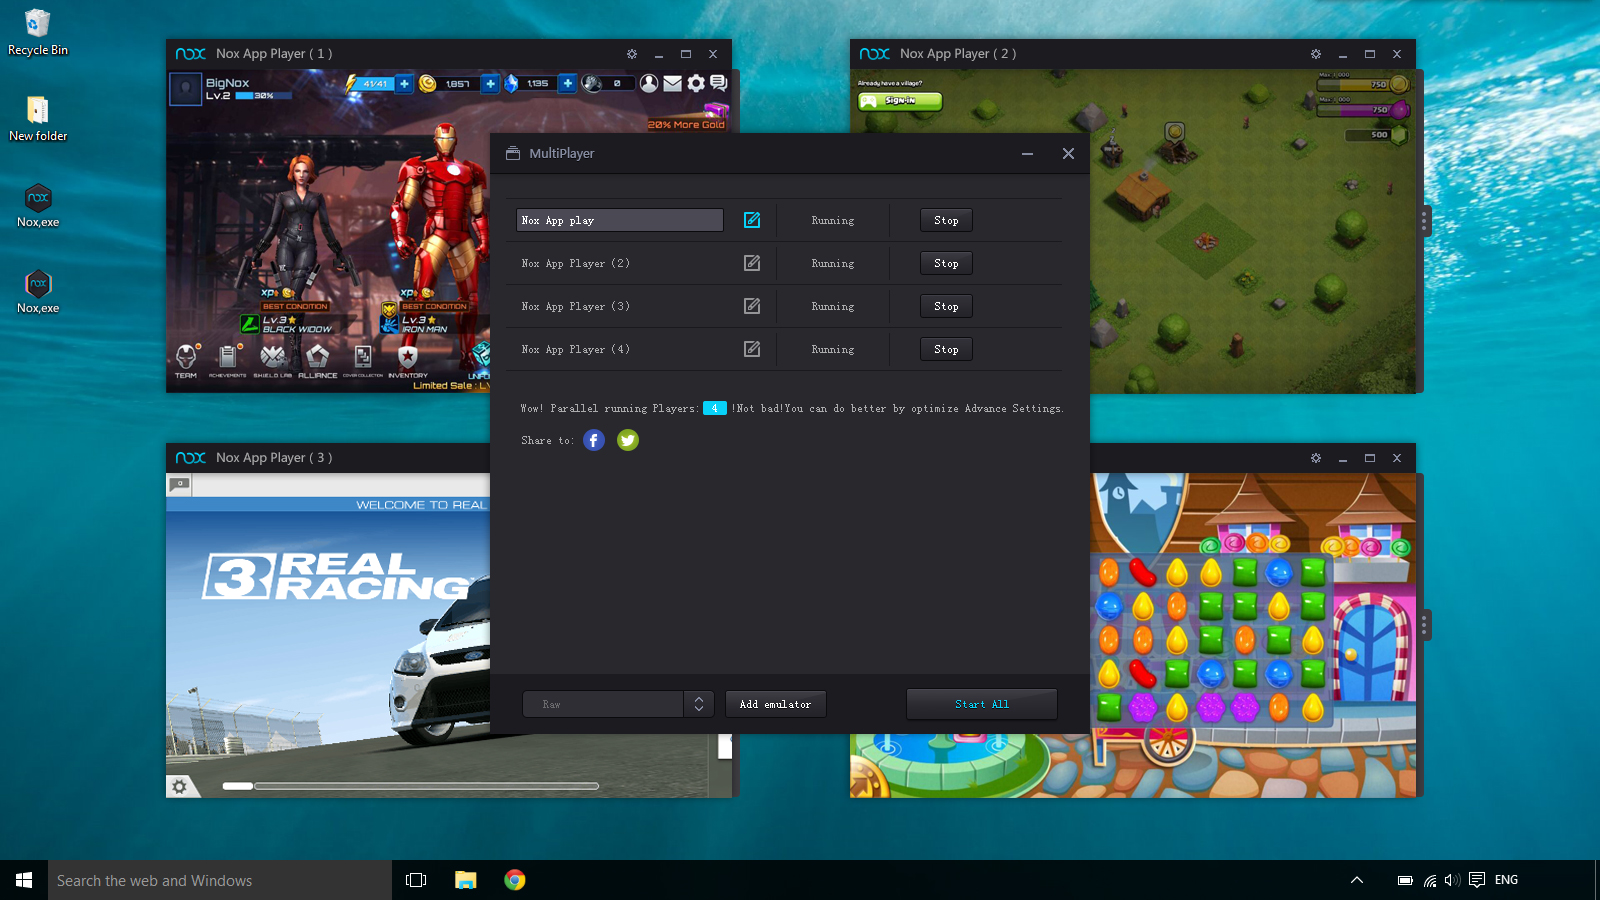 nox app player for os x 10.7.5 official